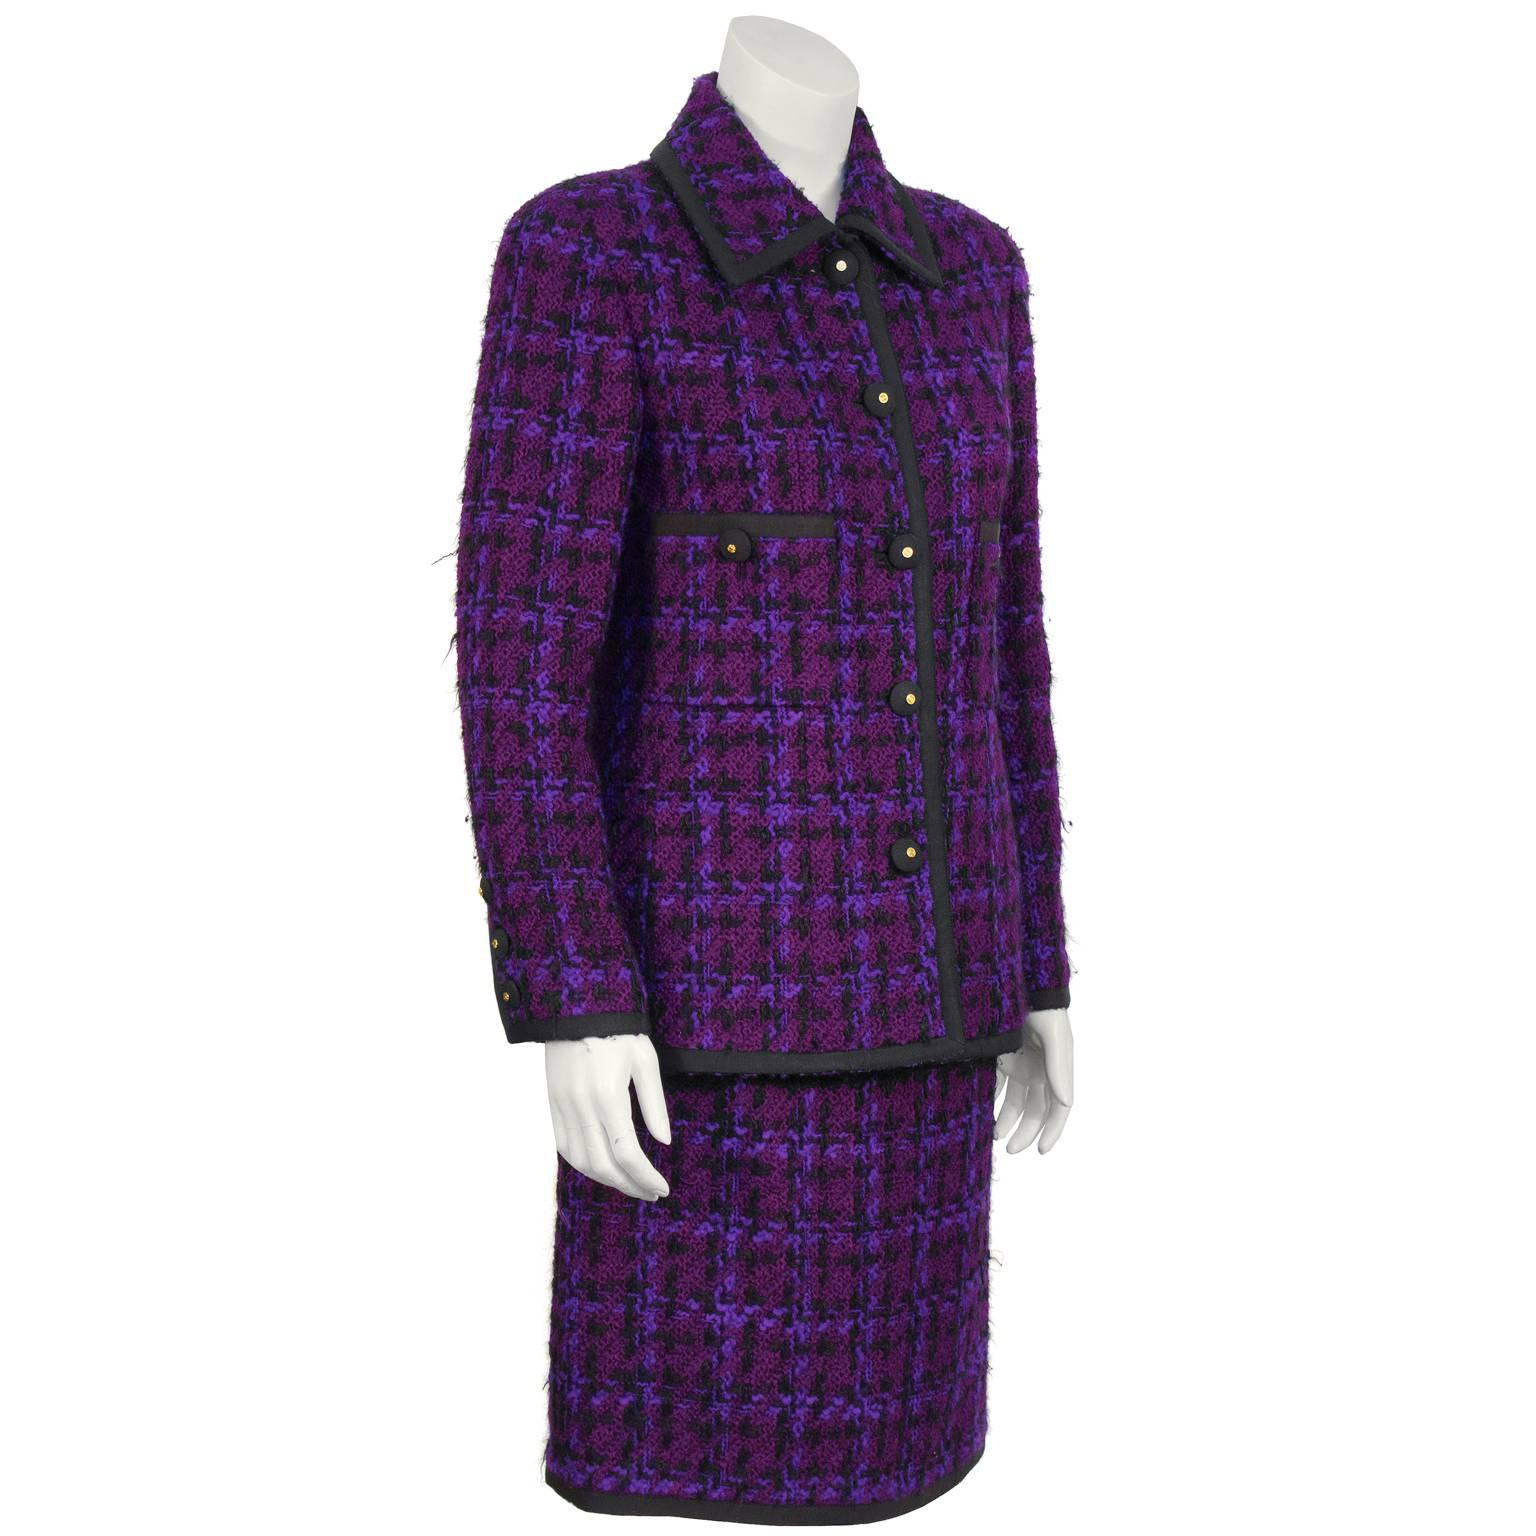 Chanel purple and black plaid boucle skirt suit from the 1980's. The jacket has a pointed collar and two patch pockets on the front that are trimmed in black grosgrain ribbon. Front closure up with grosgrain covered buttons adorned with gold CCs at